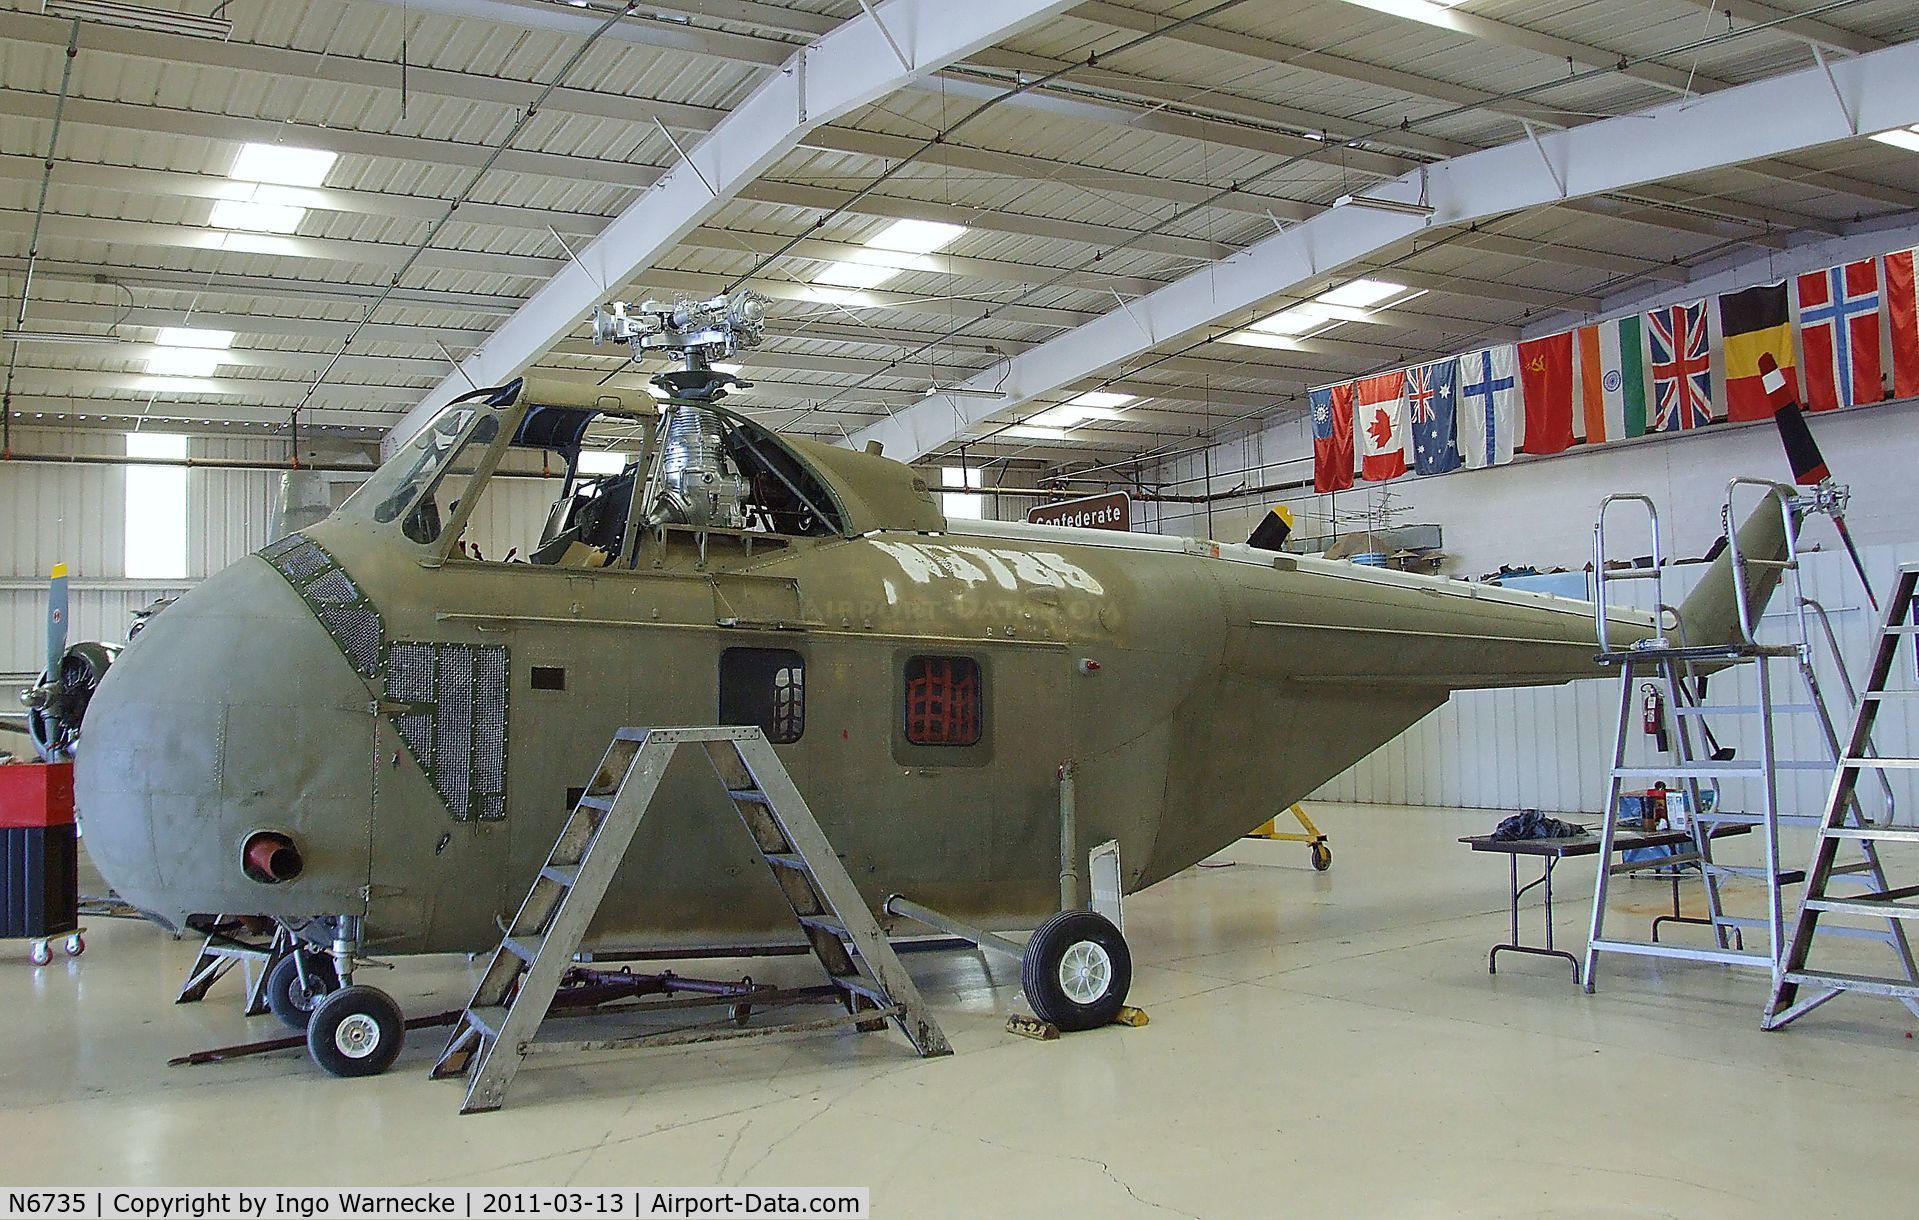 N6735, 1971 Sikorsky UH-19D Chickasaw C/N 54-1416, Sikorsky UH-19D Chickasaw at the CAF Arizona Wing Museum, Mesa AZ